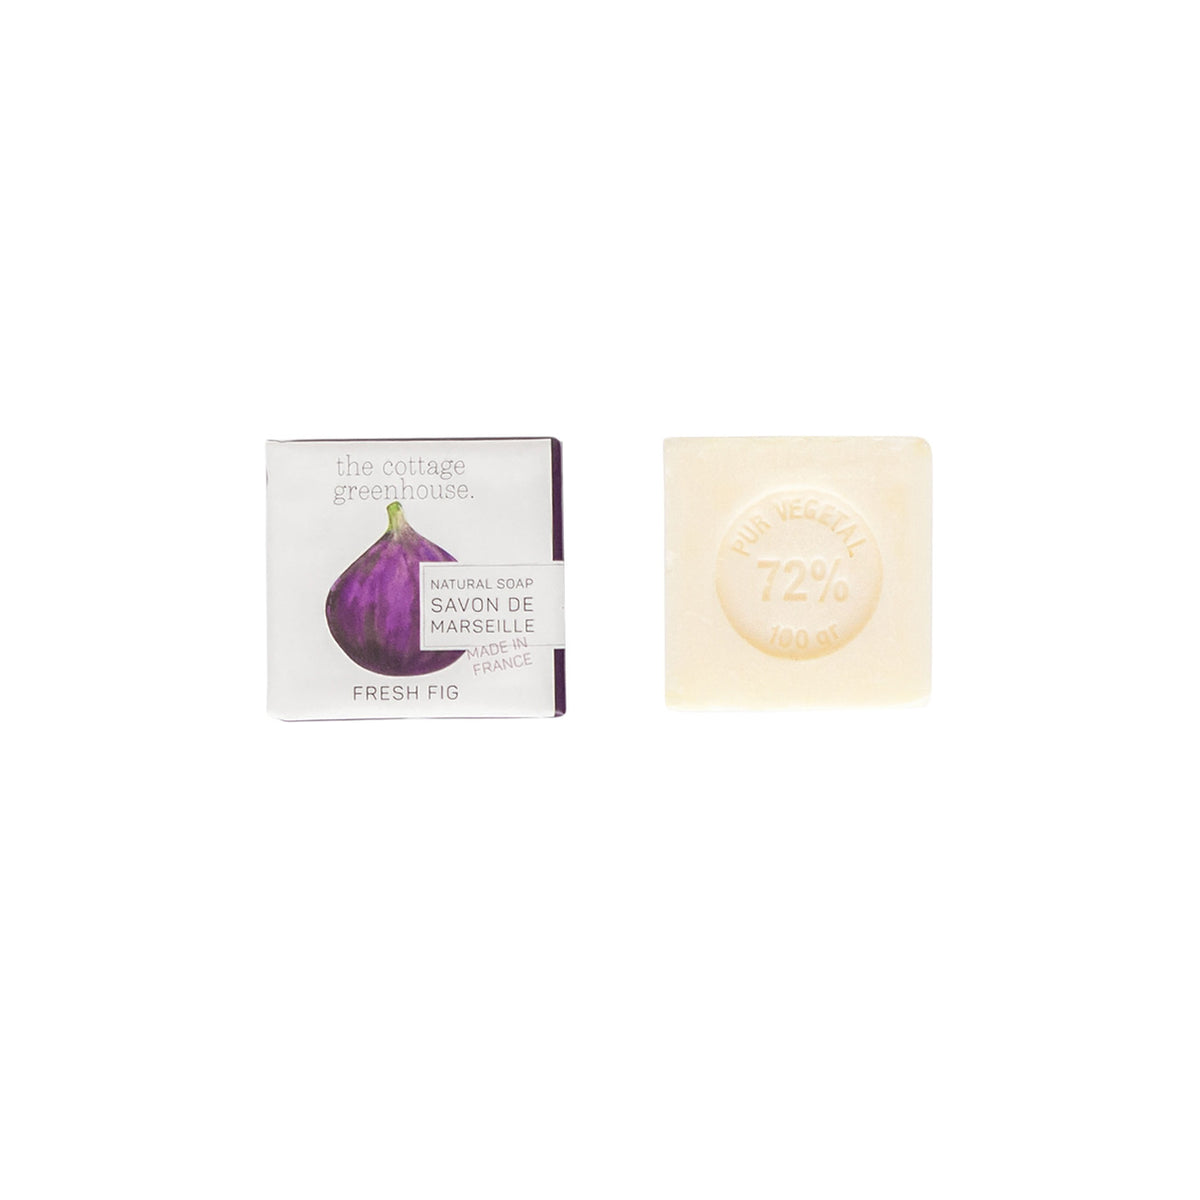 A bar of The Cottage Greenhouse Fresh Fig Soap and its packaging with a purple fig design. The soap is translucent and stamped with "le vegetal 72% 100g". The package reads "Margot Elena".